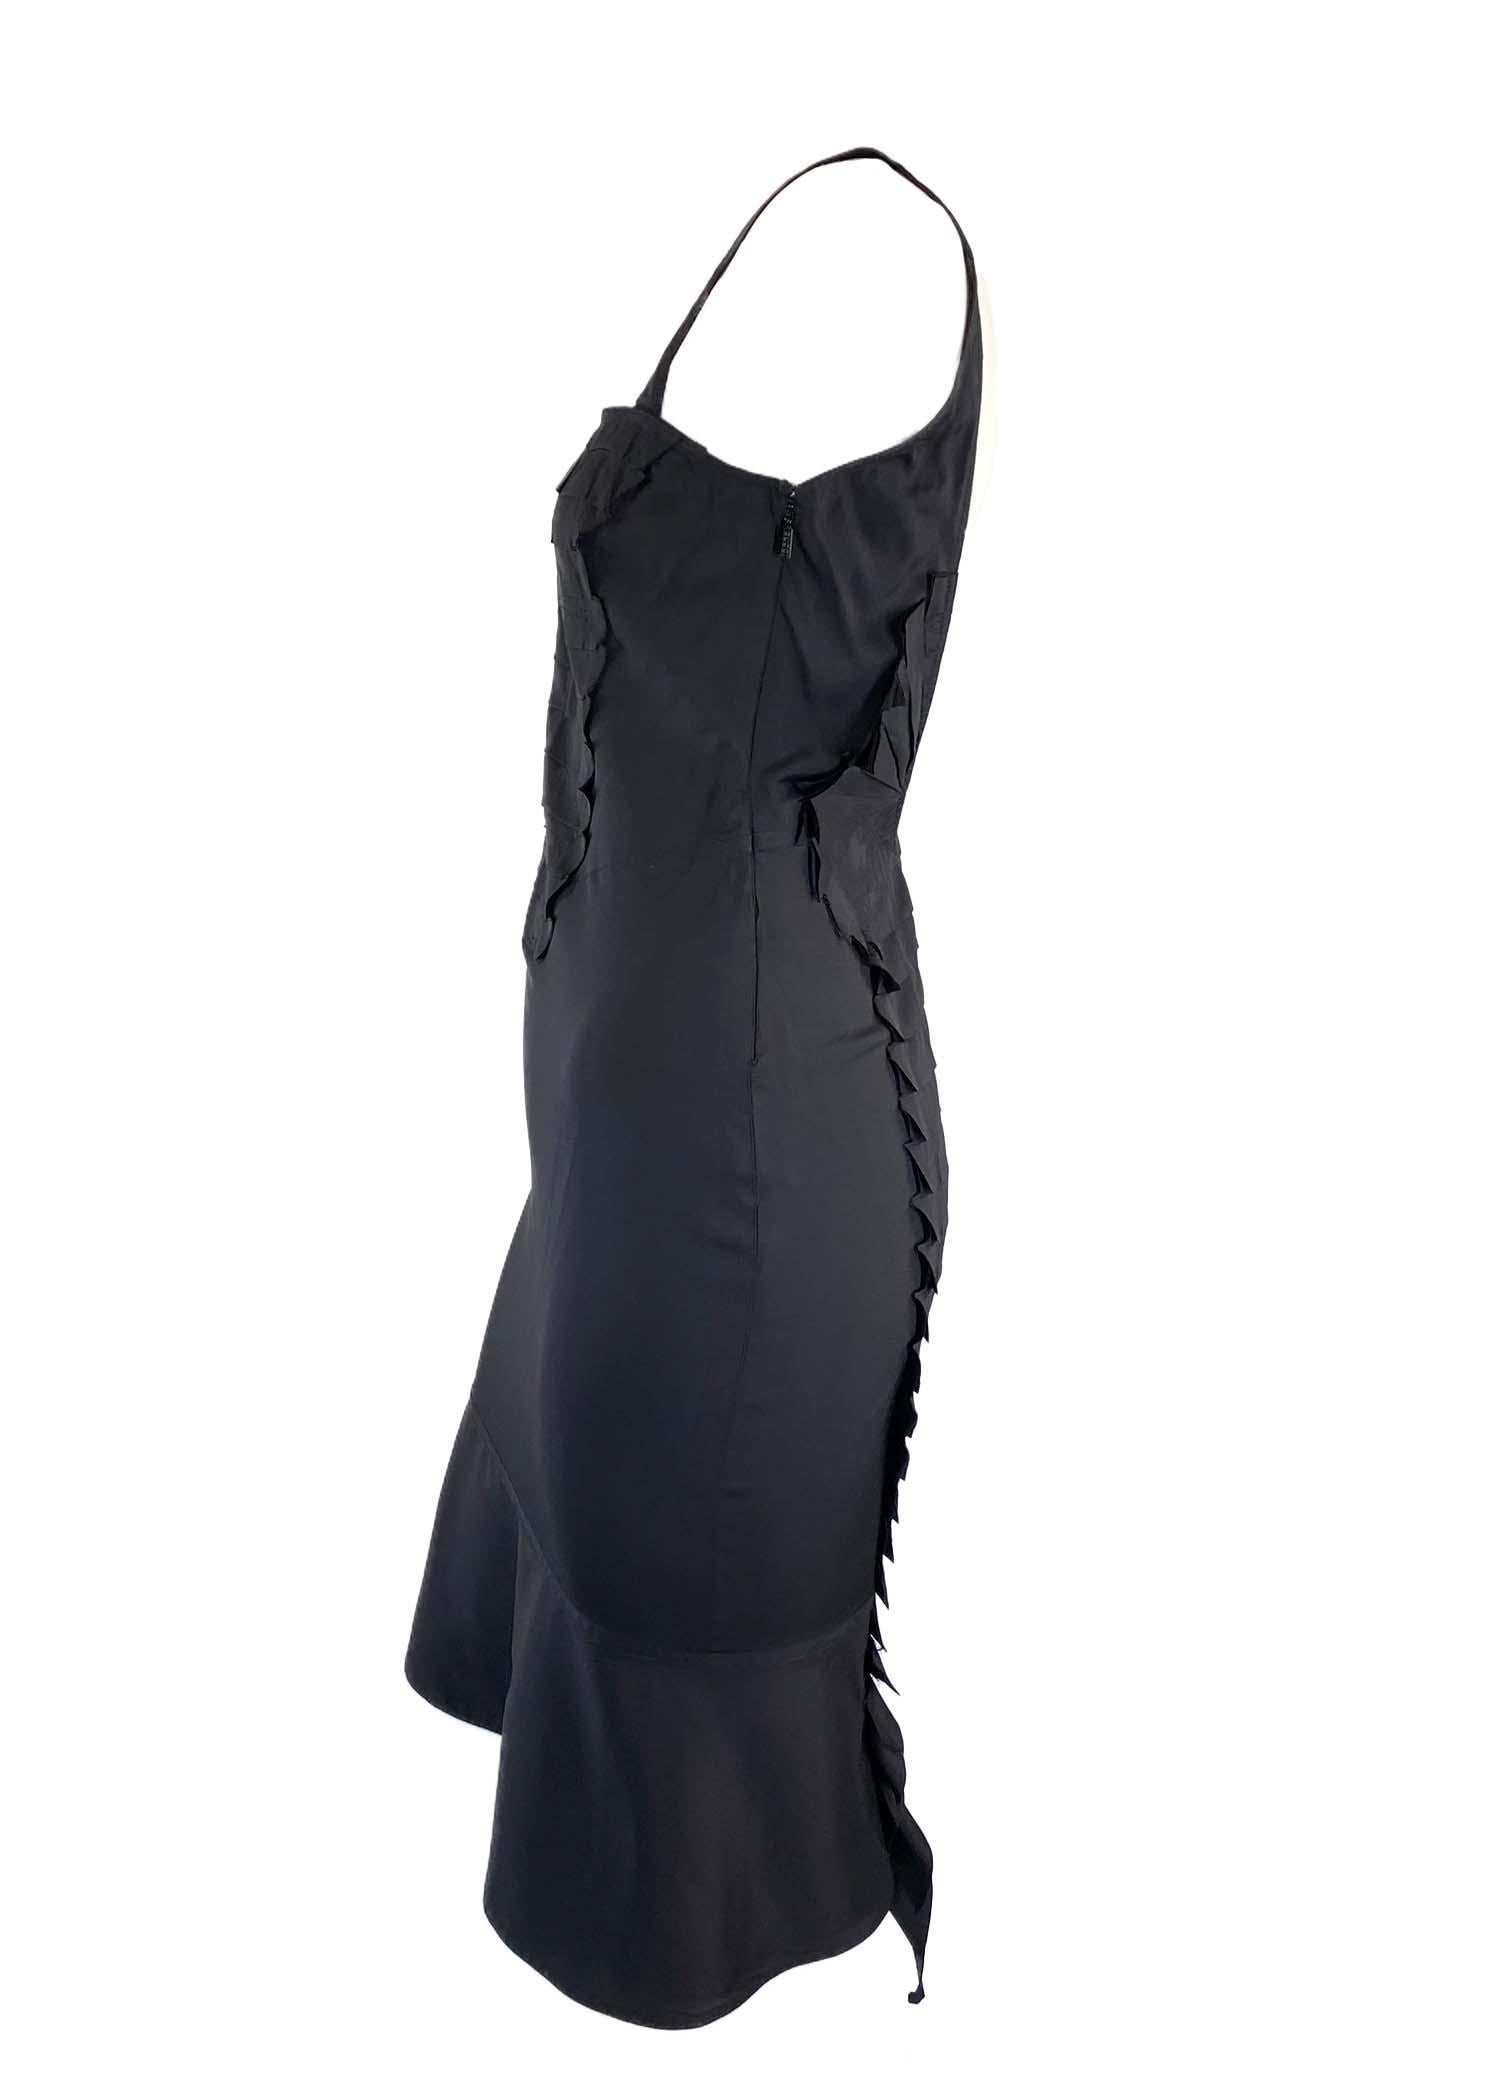 Presenting a black ribbon appliqué Gucci ribbon dress, designed by Tom Ford. From the Spring/Summer 2004 collection, this beautiful silk blend dress features a square neckline, flare skirt, and a plunging back. Like many pieces from this collection,